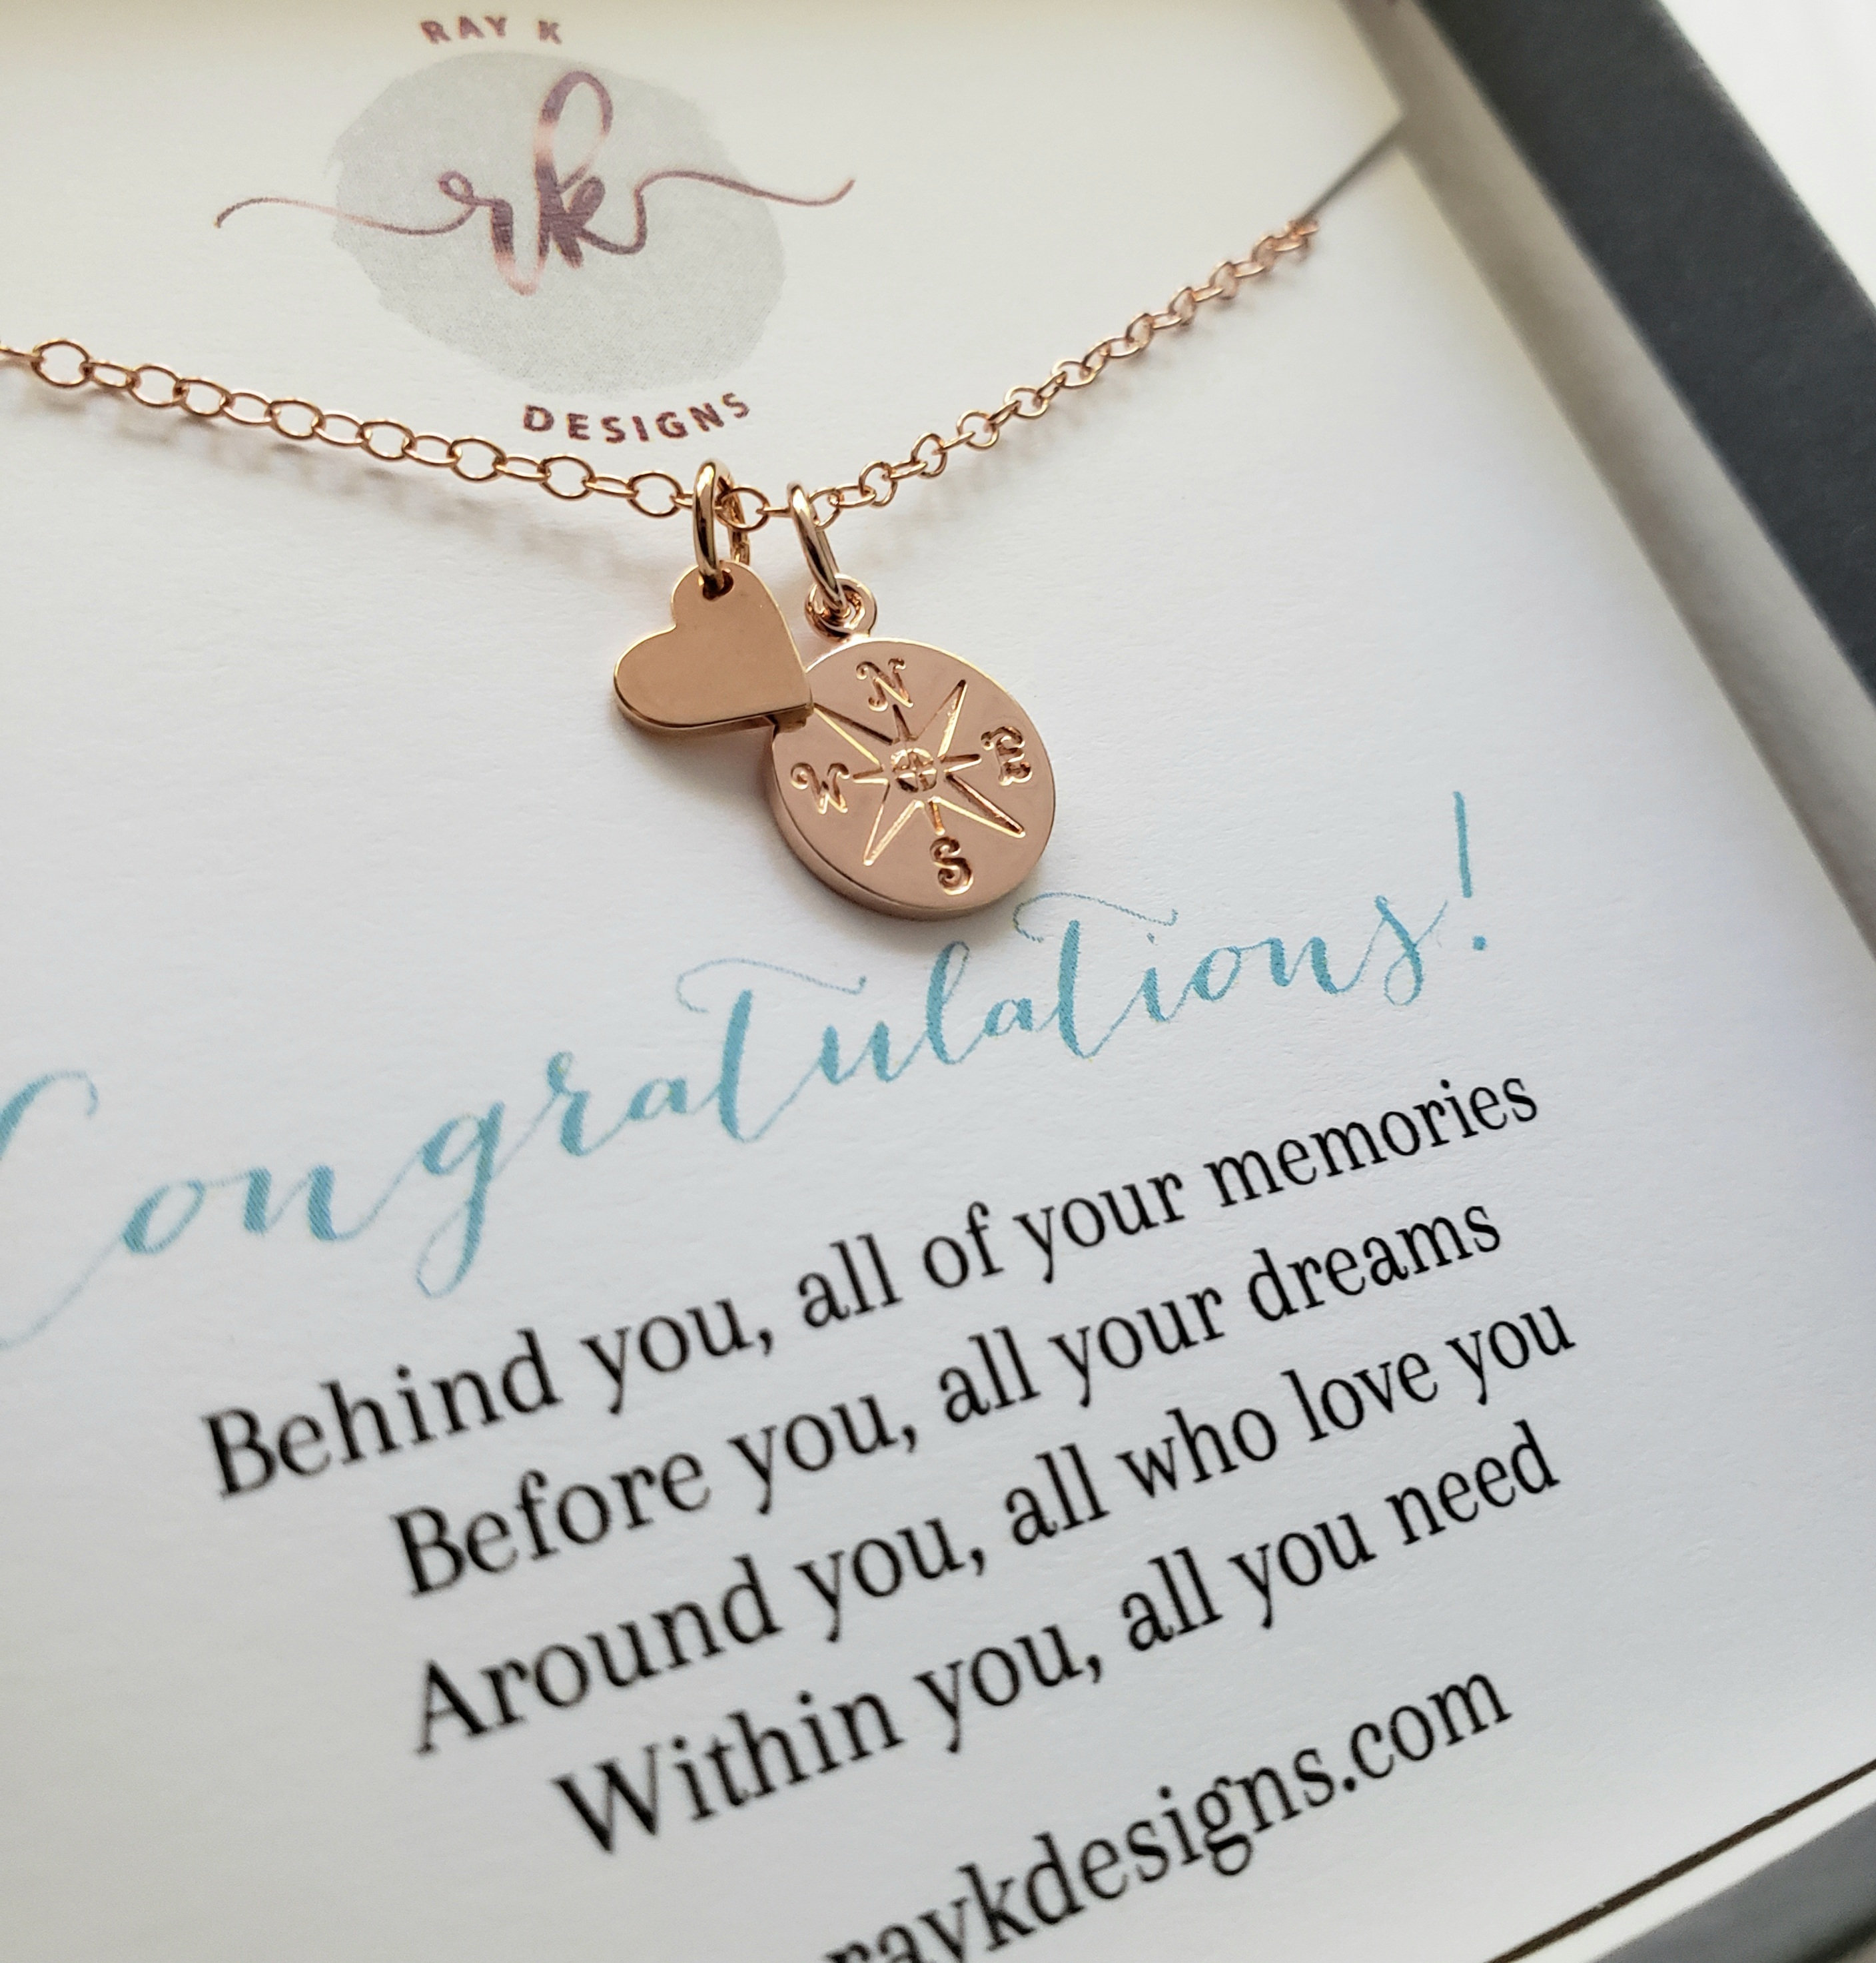 2. Rose Gold Compass Heart Necklace